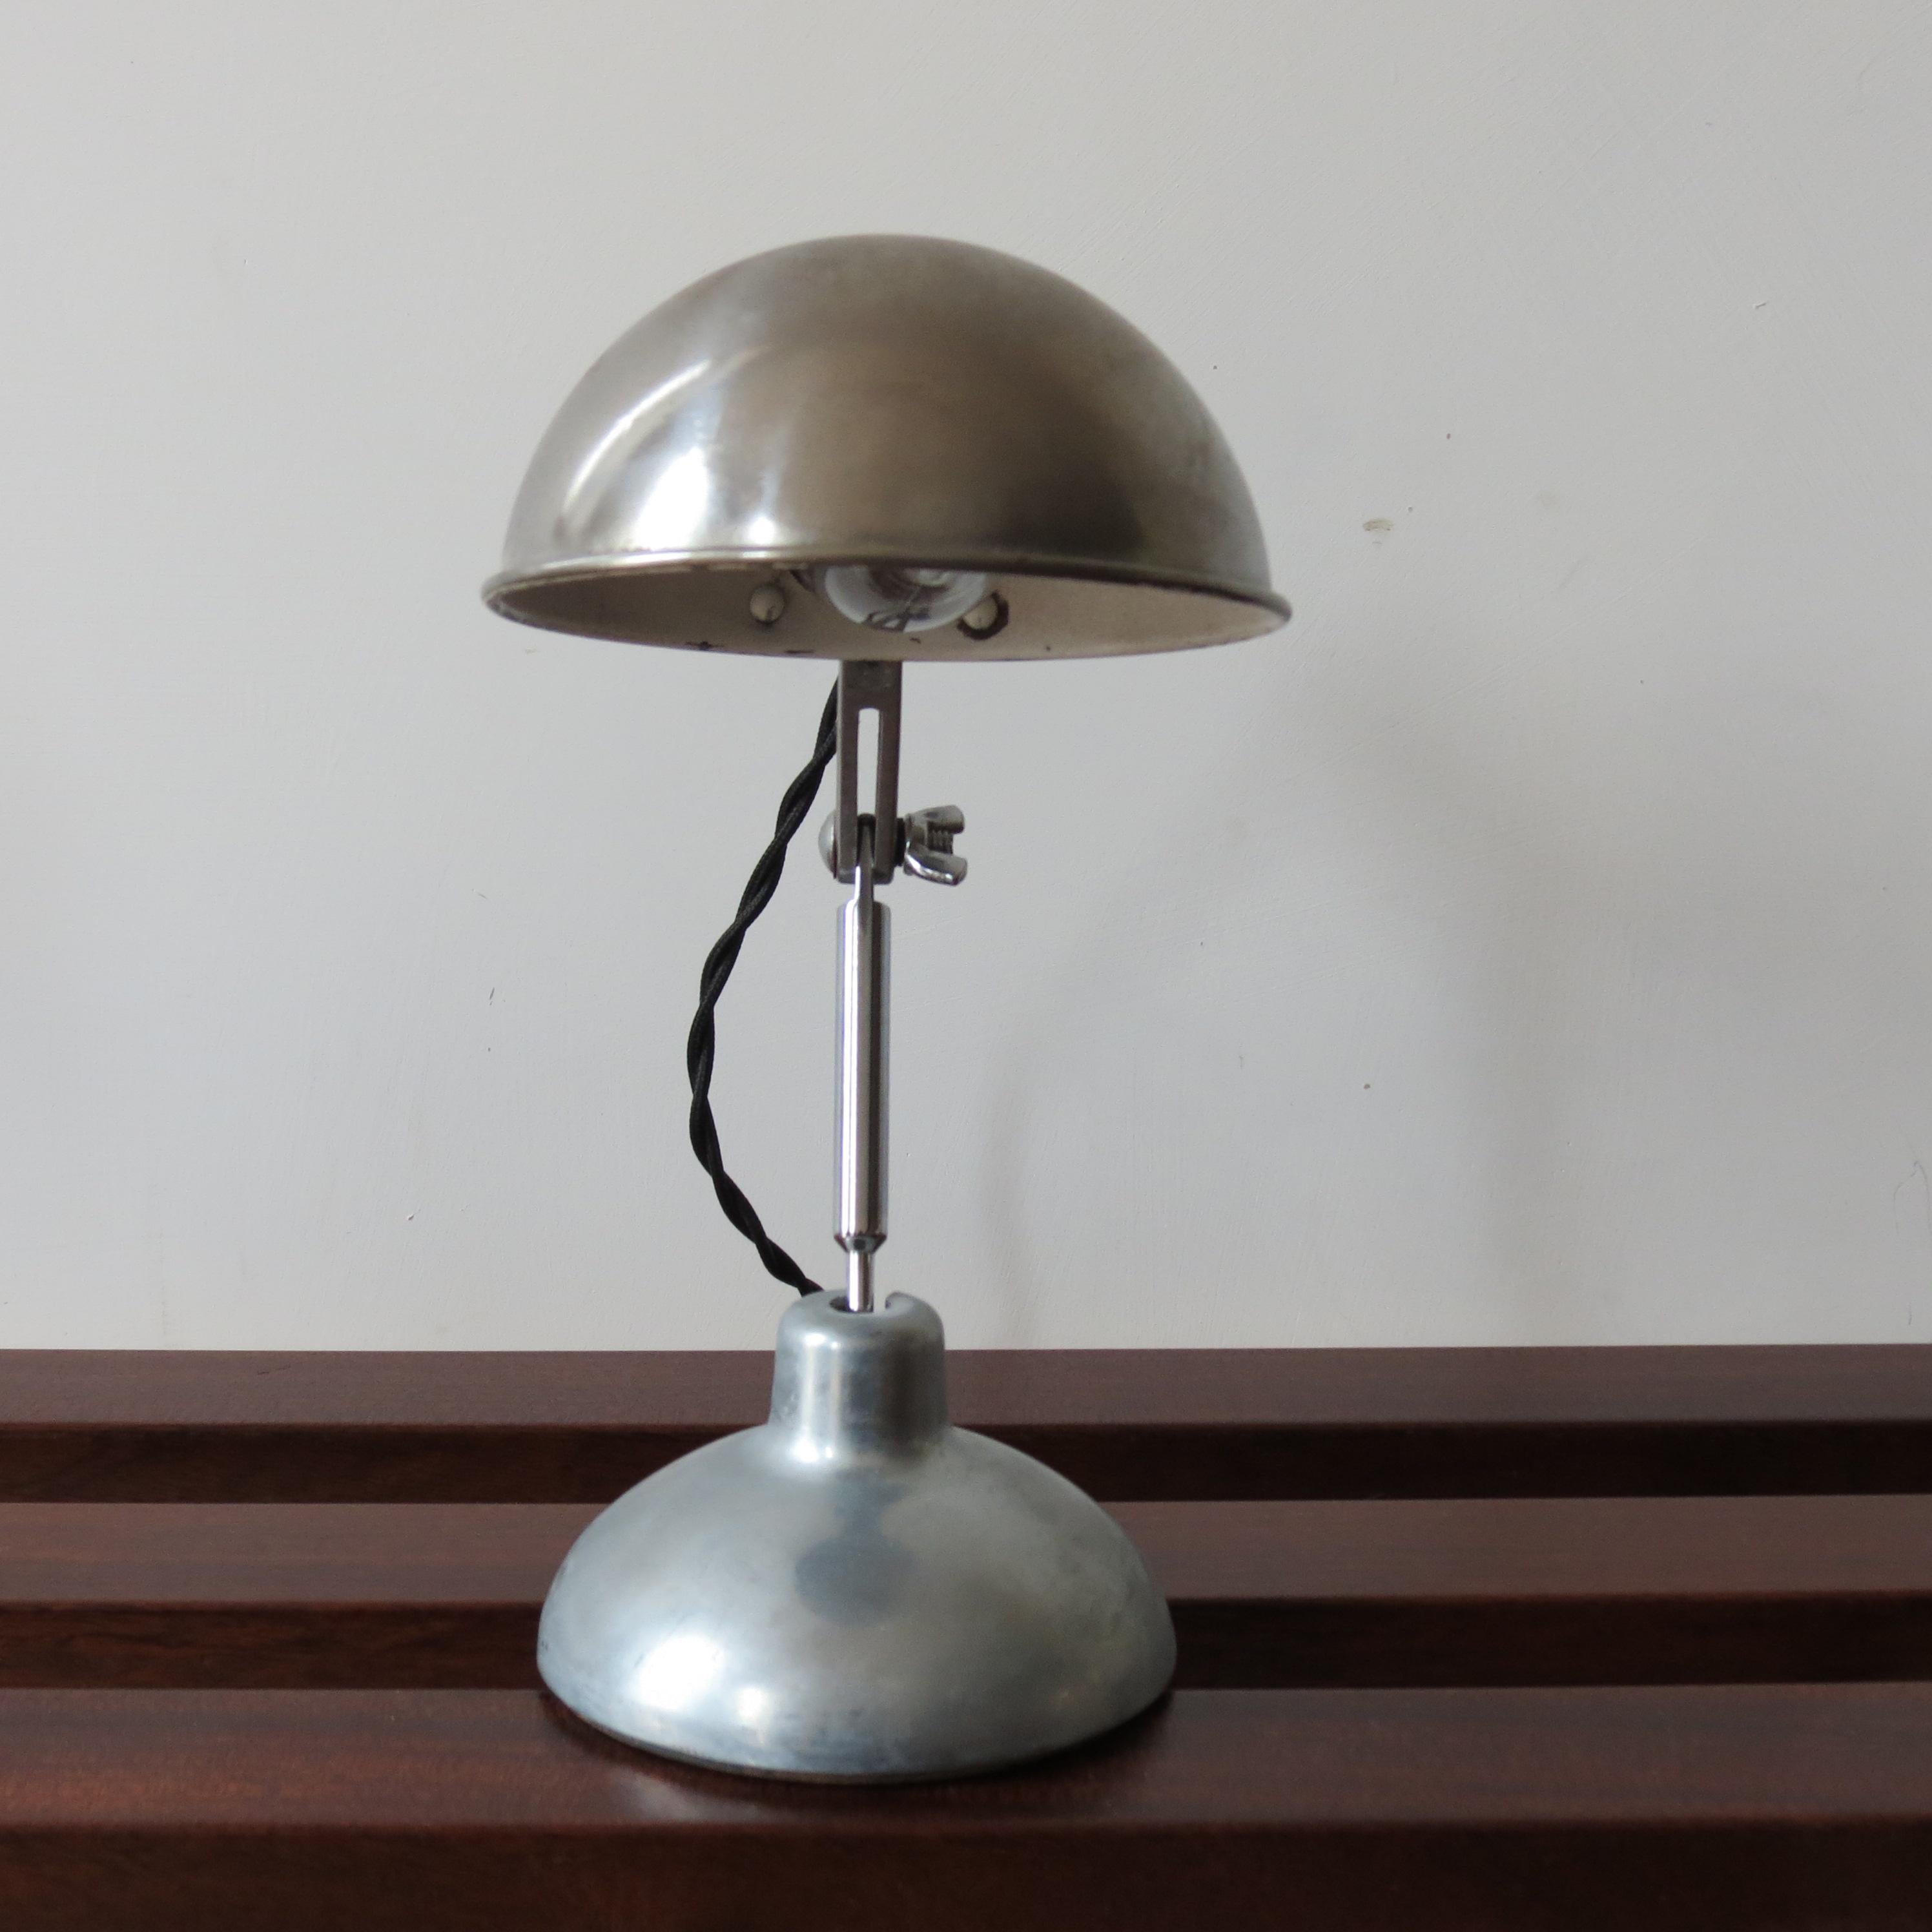 Wonderful desk lamp by Metek England from the 1950s. Made from polished aluminium with steel rod upright, bakelite lamp fitting, newly rewired. Designed originally as a travel lamp, its fully manoeuvrable to many different positions and it retains